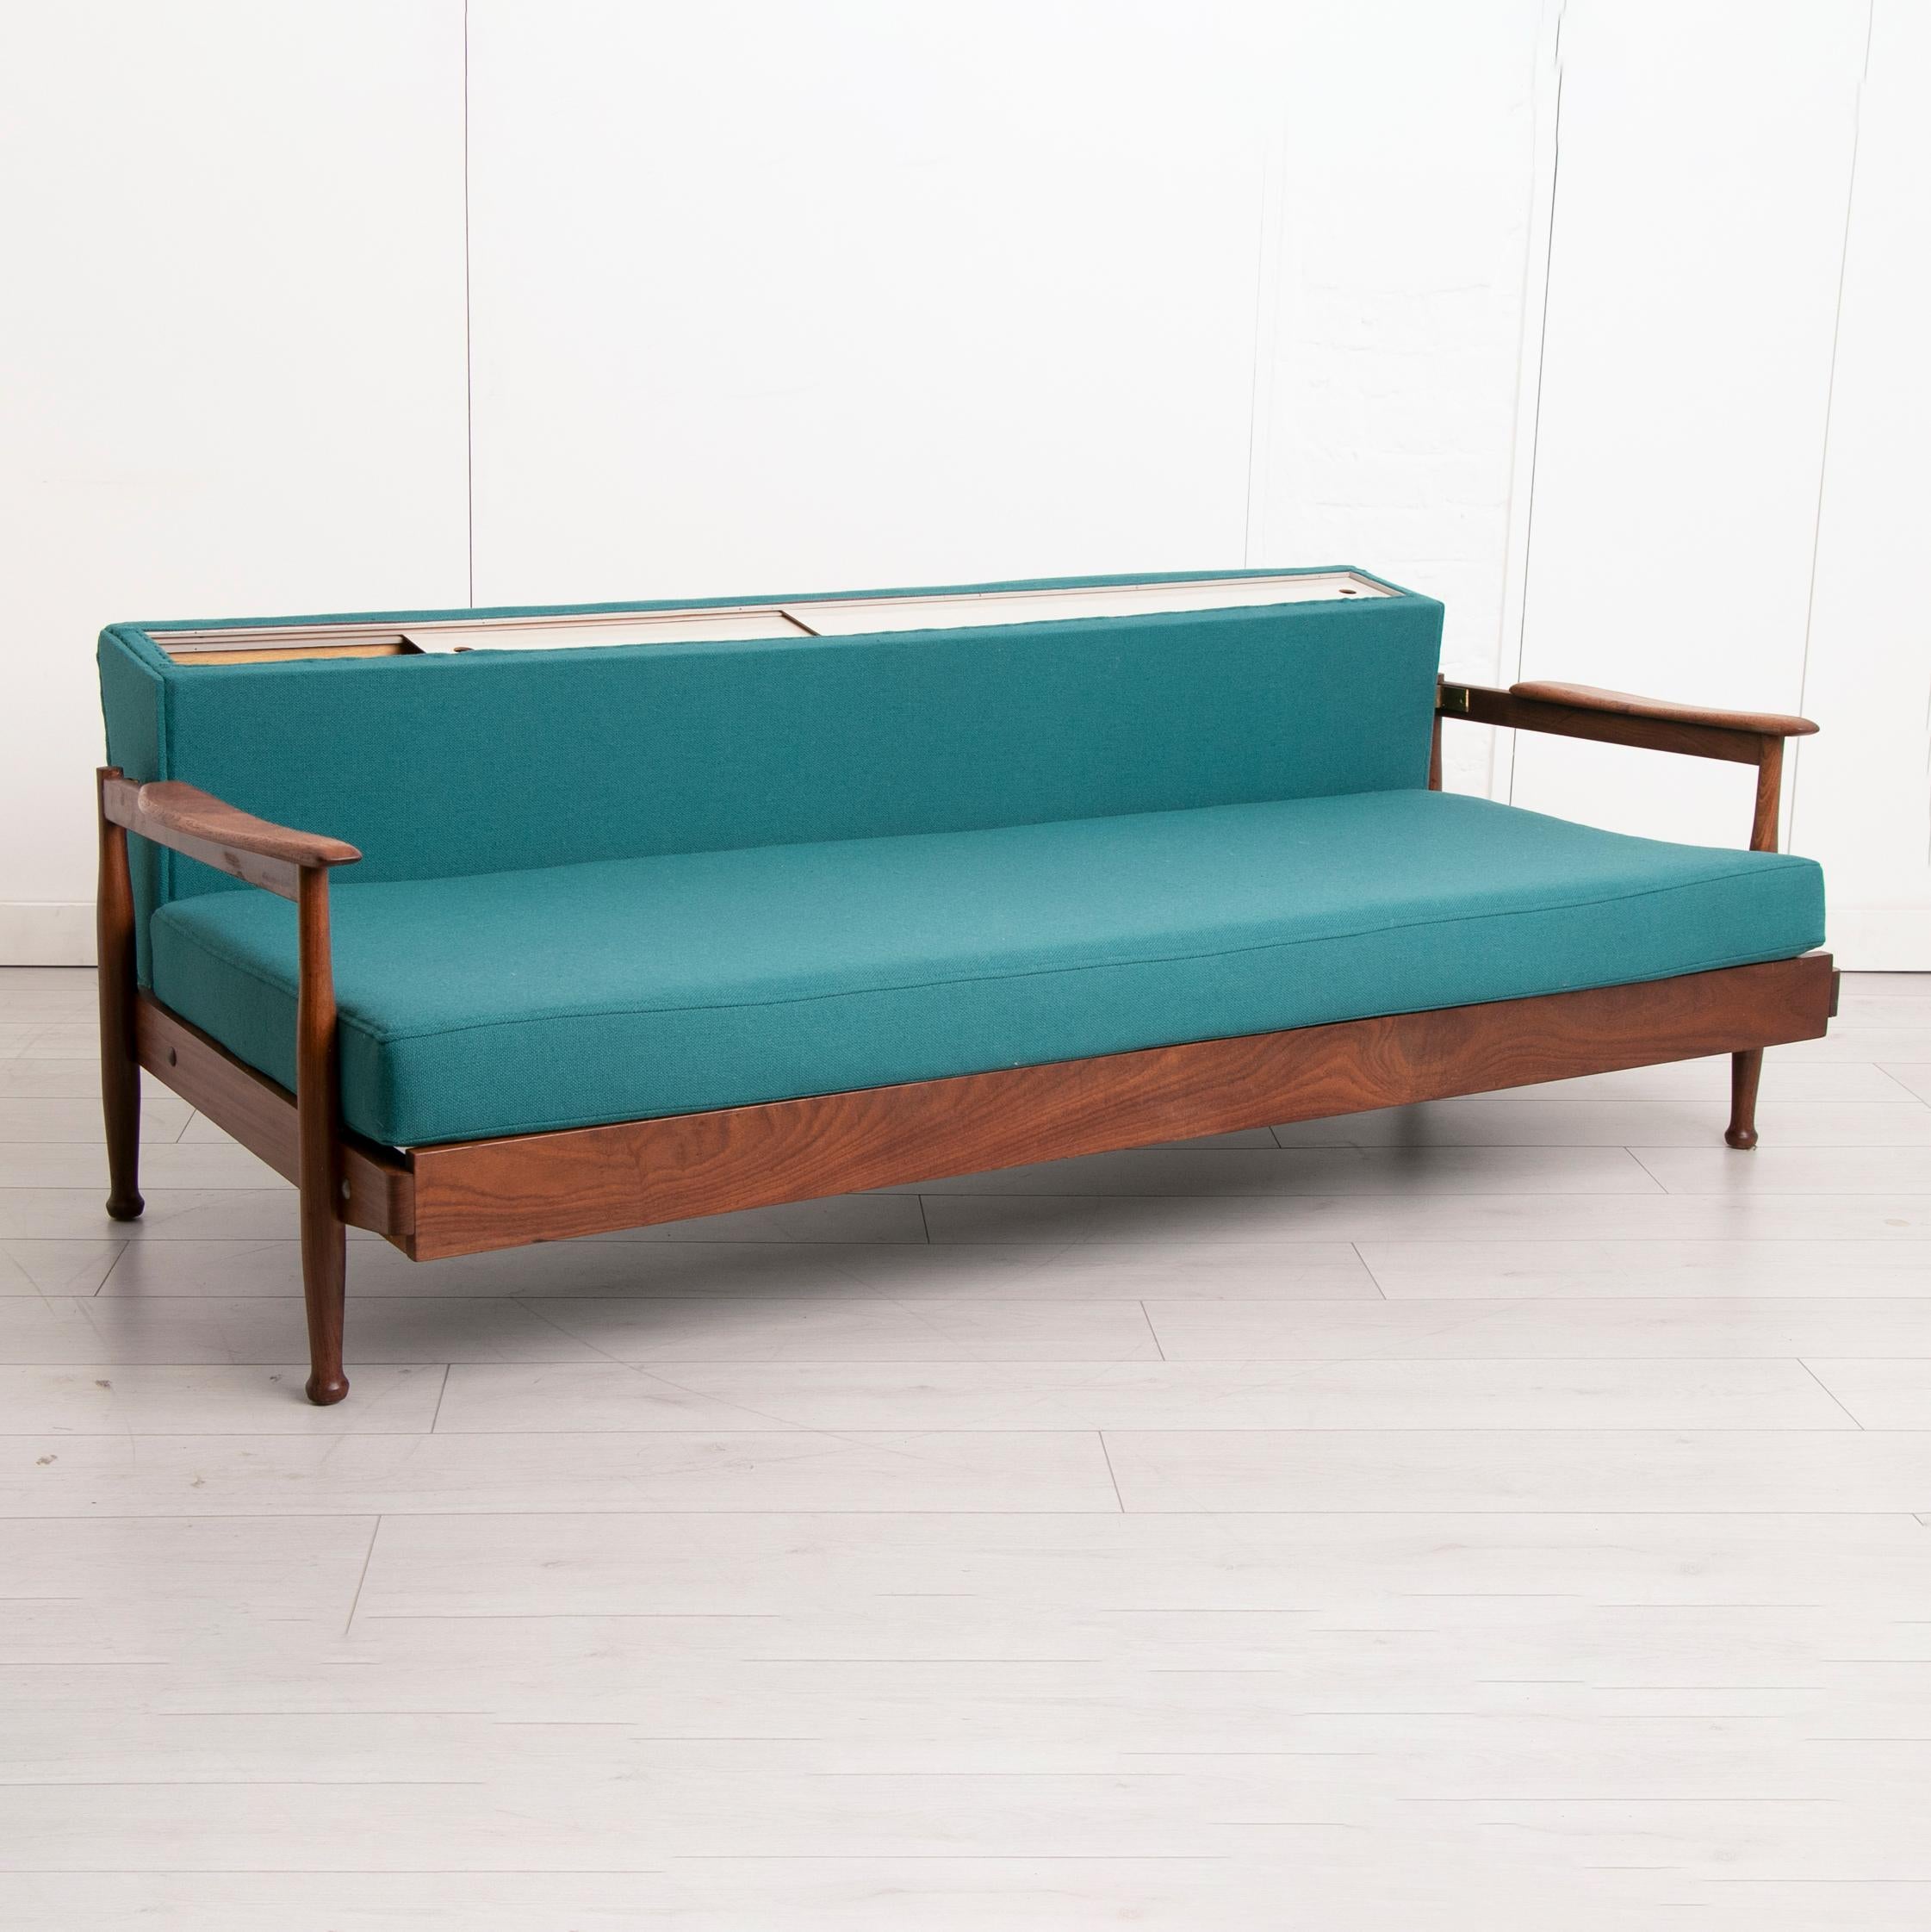 Mid-Century Modern Midcentury Teak & Afrormosia Day Bed by Guy Rogers c.1960